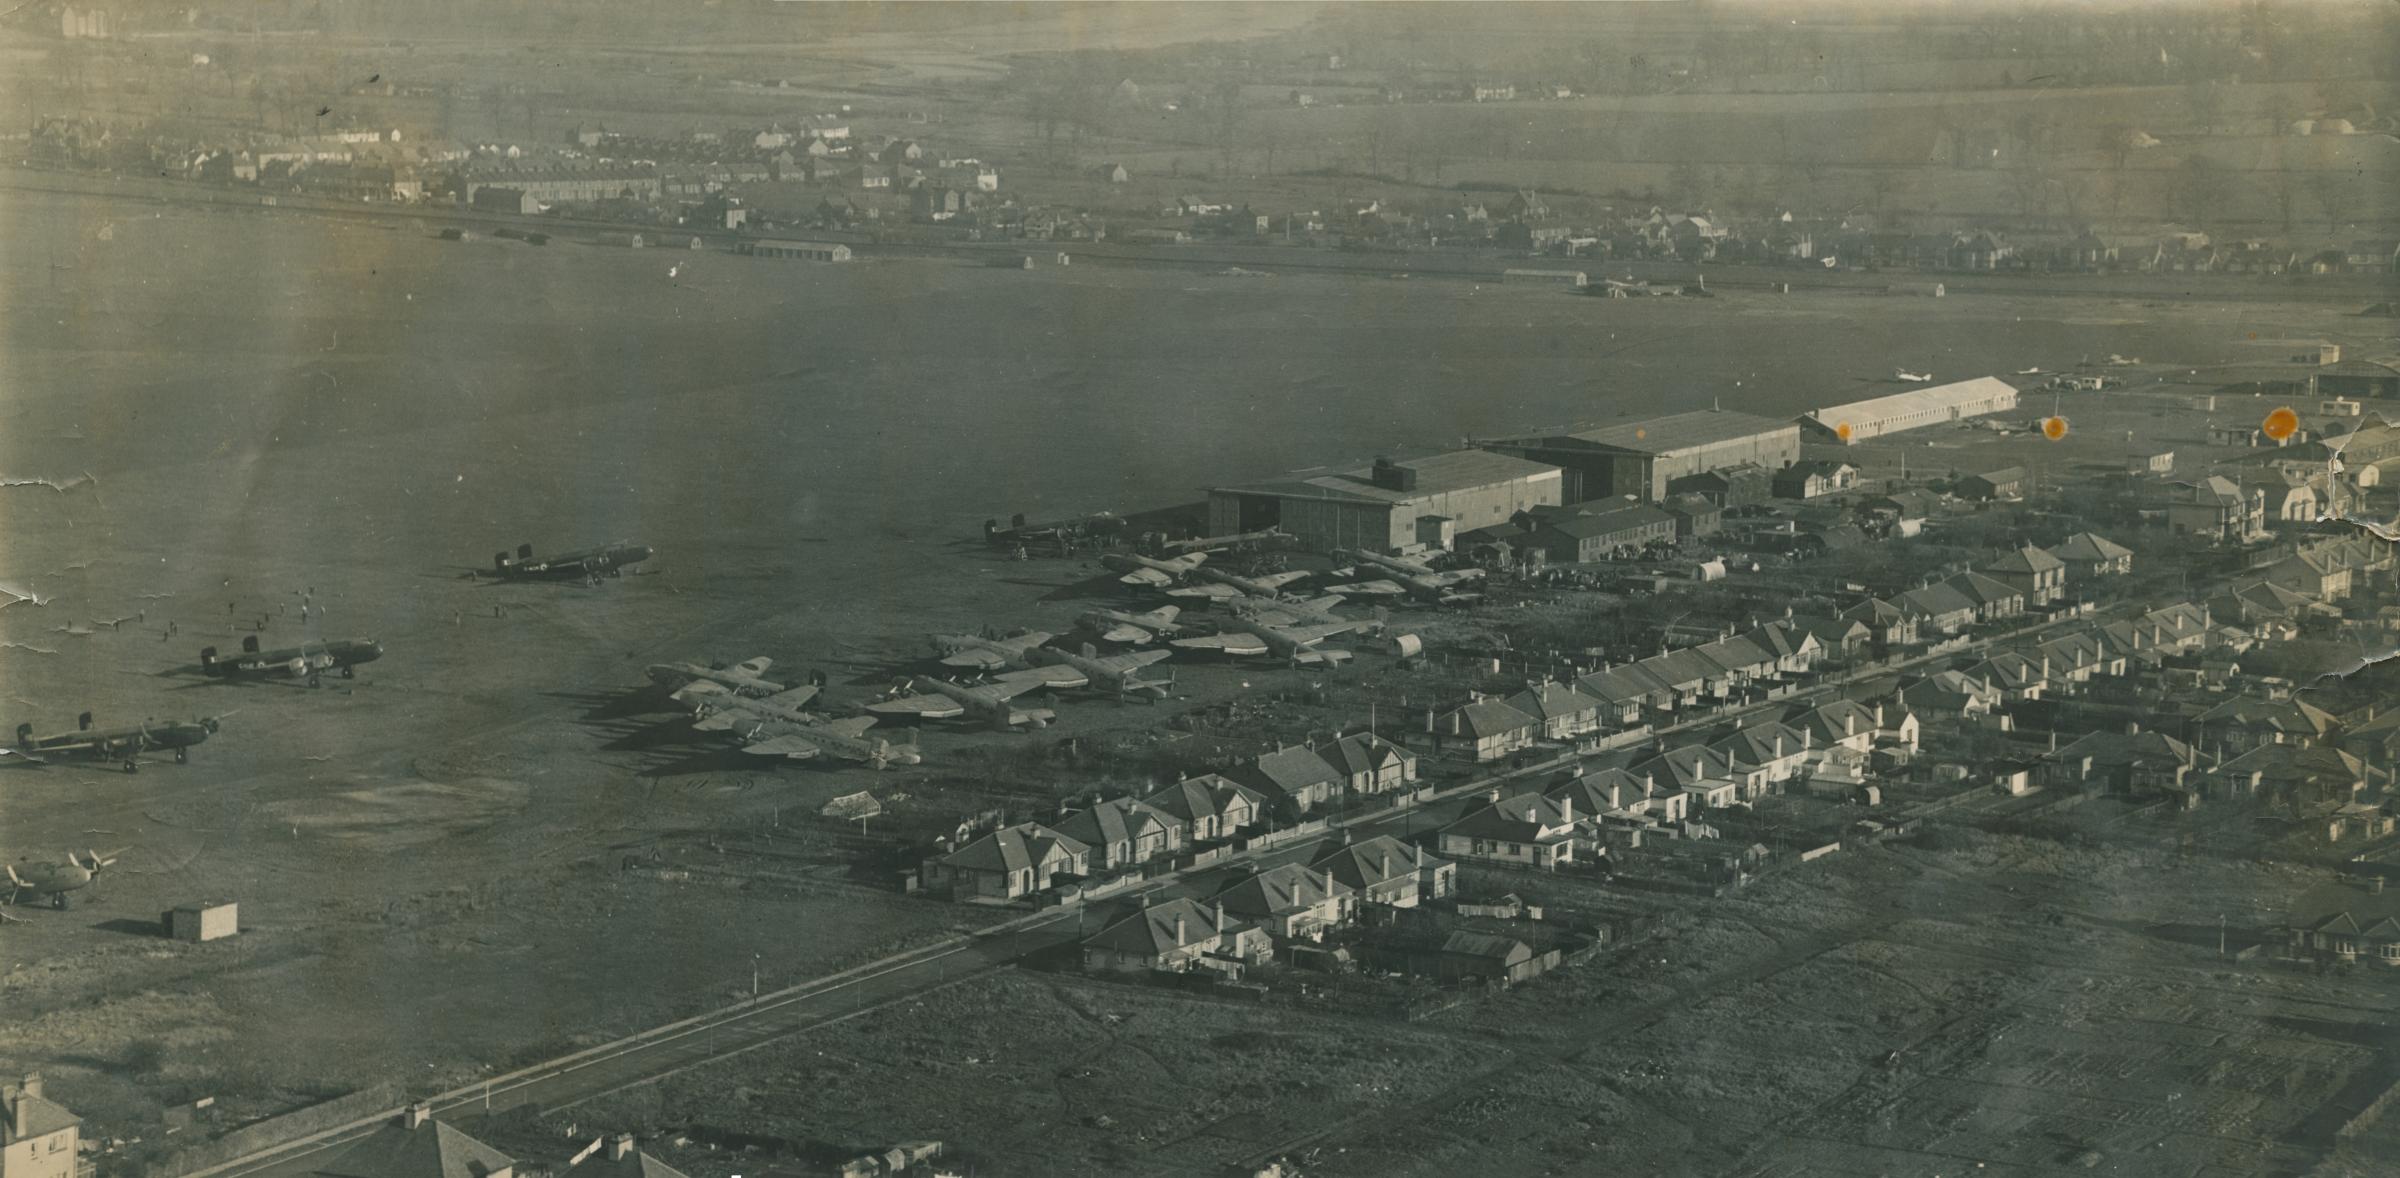 From yesteryear - how Southend Airport looked from the skies back in 1949